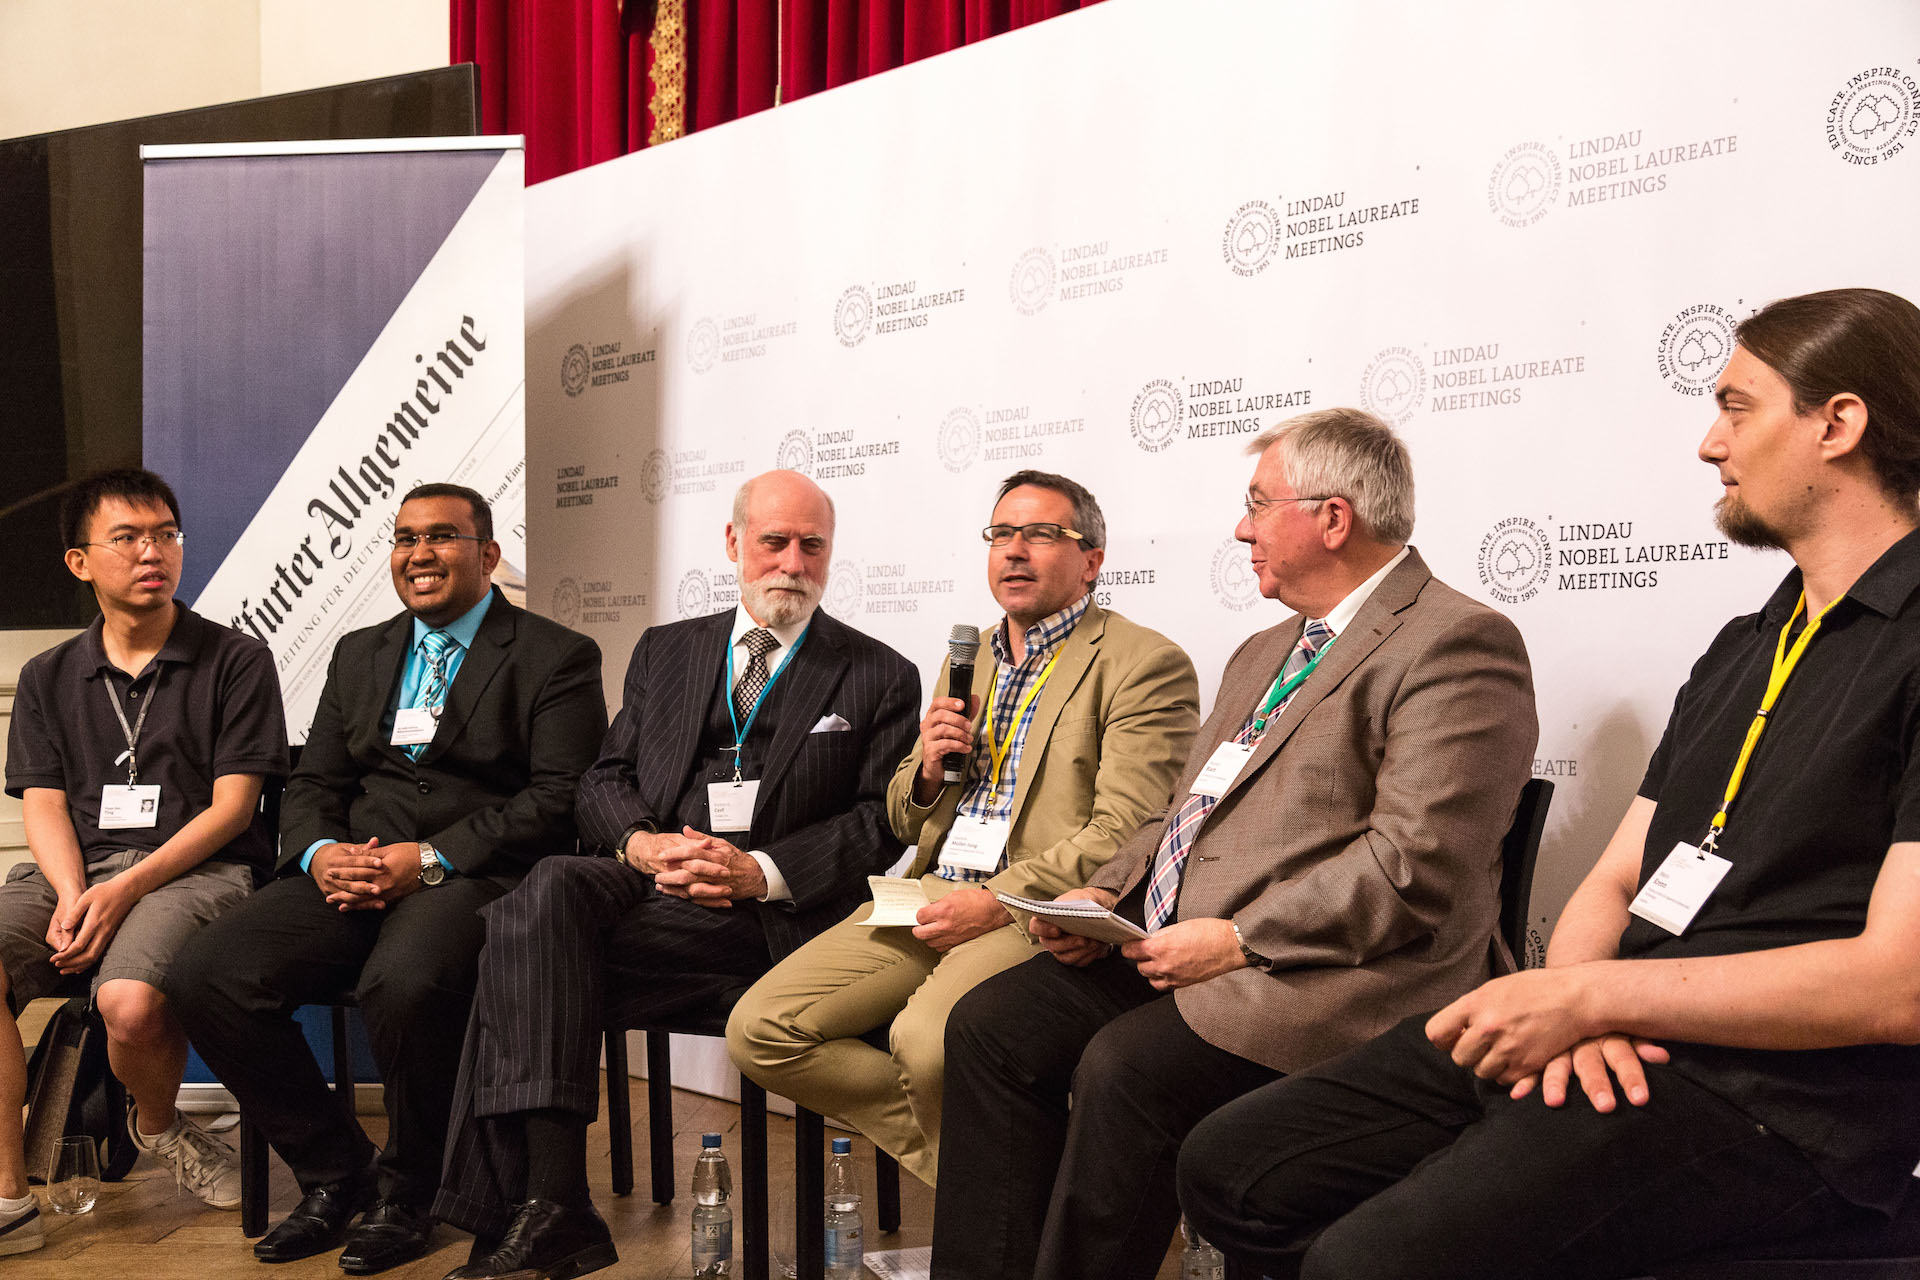 Press talk on artificial intelligence in Lindau - from left to right: Yuan-sen Ting and Arrykrishna Mootoovaloo (young scientists), Turing-Award winner Vinton Cerf, Joachim Müller-Jung, head of the FAZ’s science/nature division, Prof. Rainer Blatt, 1 of 2 scientific chairmen and Mario Krenn from the Vienna Center for Quantum Science and Technology.